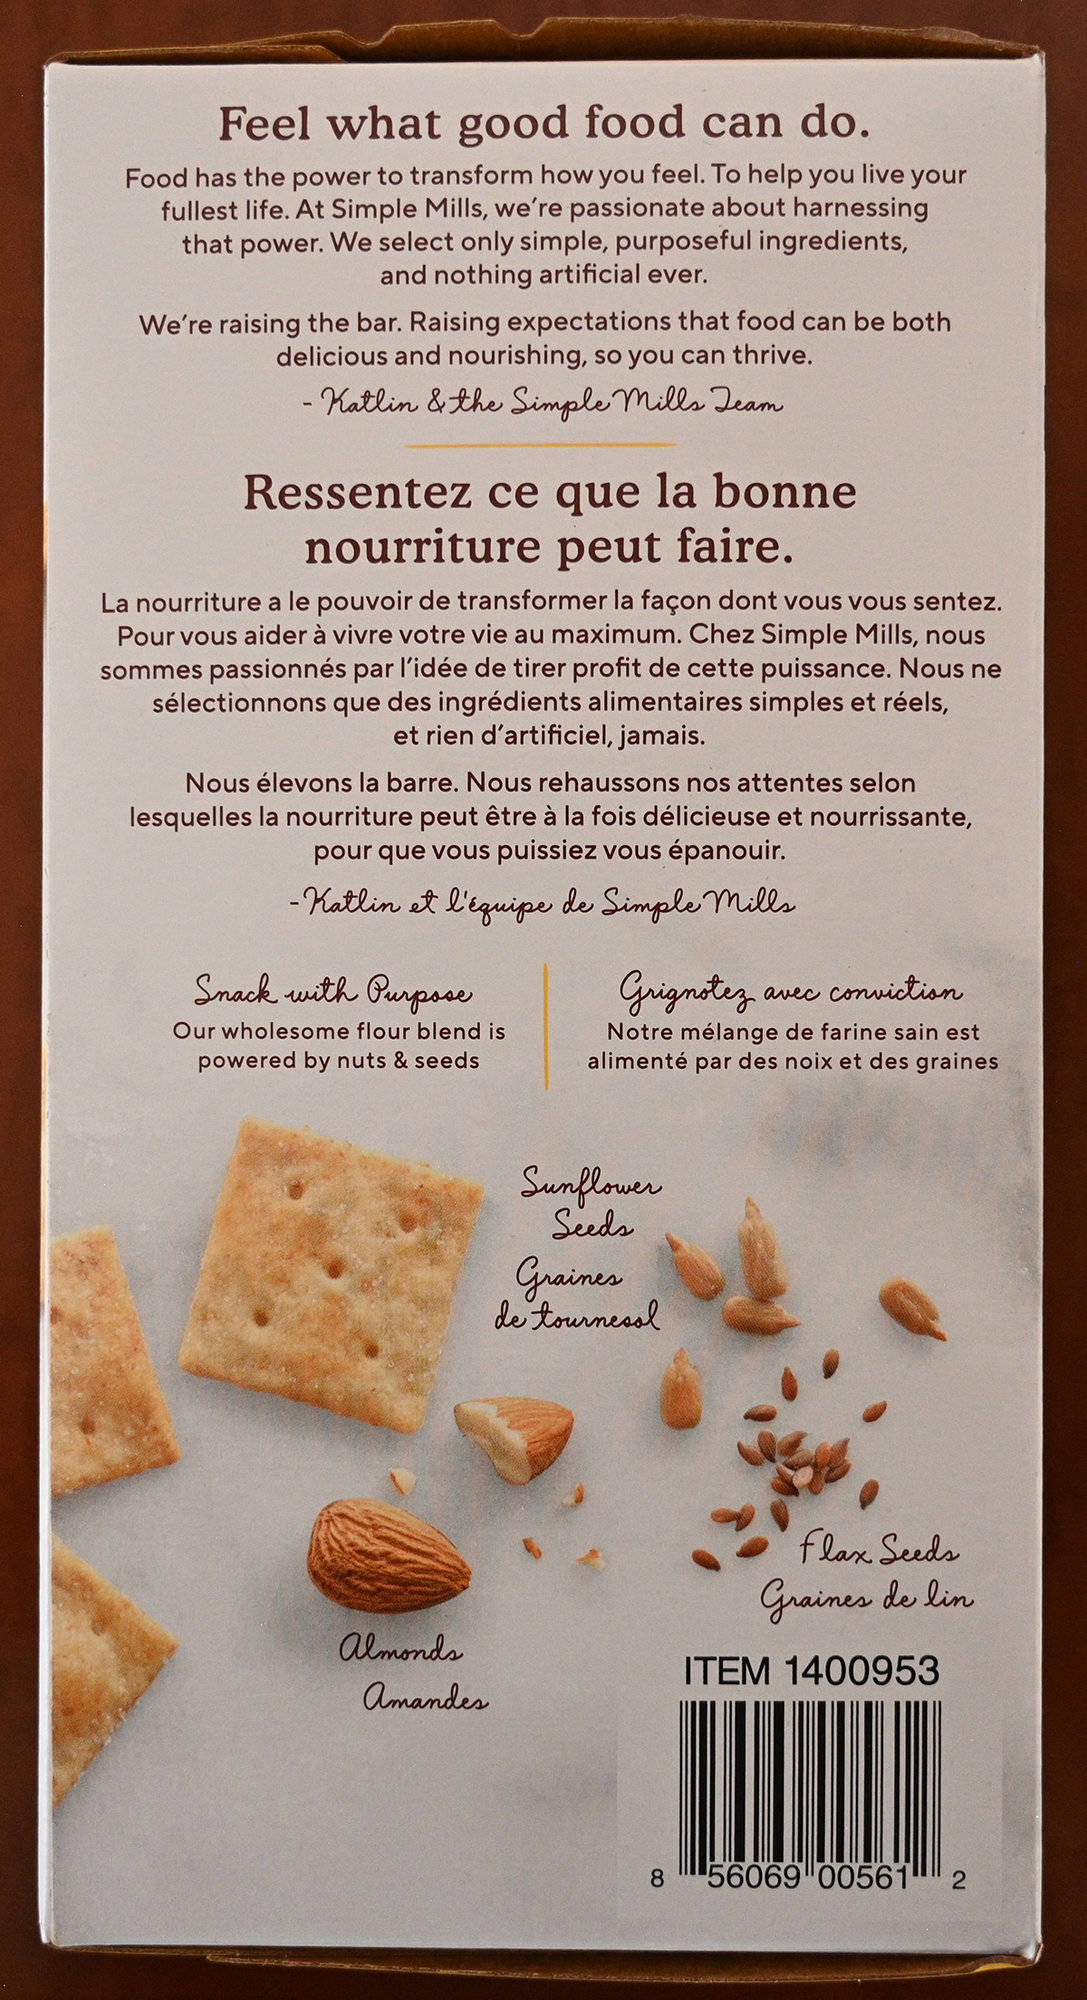 Image of the Simple Mills crackers product description from the back of the box.